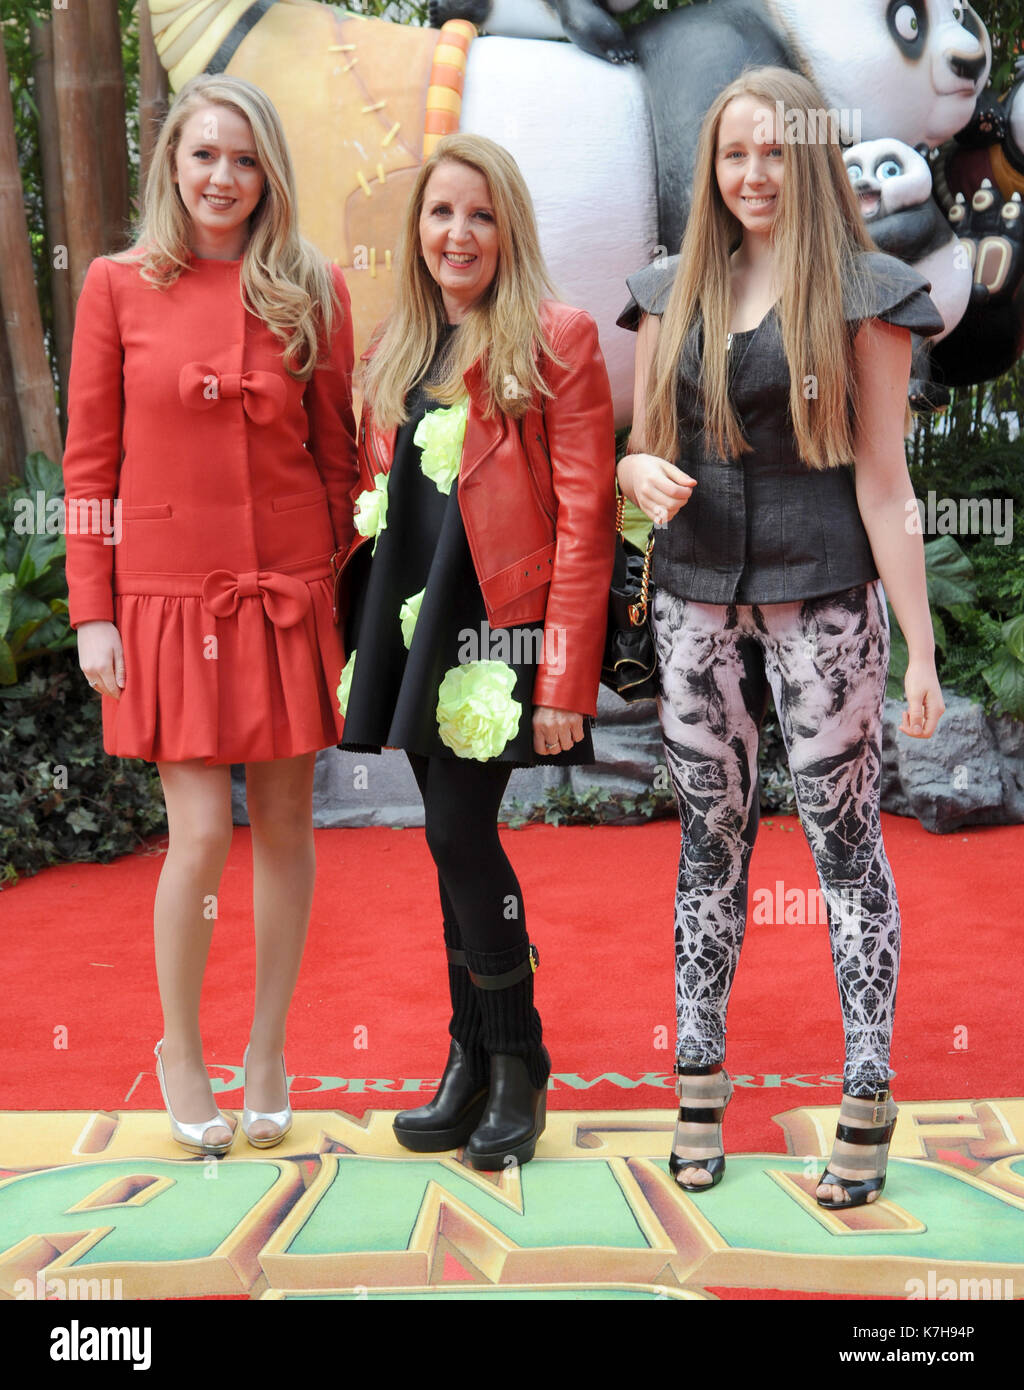 Photo Must Be Credited ©Alpha Press 078237 06/03/2016 Gillian McKeith with daughters Skylar McKeith Magaziner and Afton McKeith at the Kung Fu Panda 3 Movie Premiere in Leicester Square London. Stock Photo